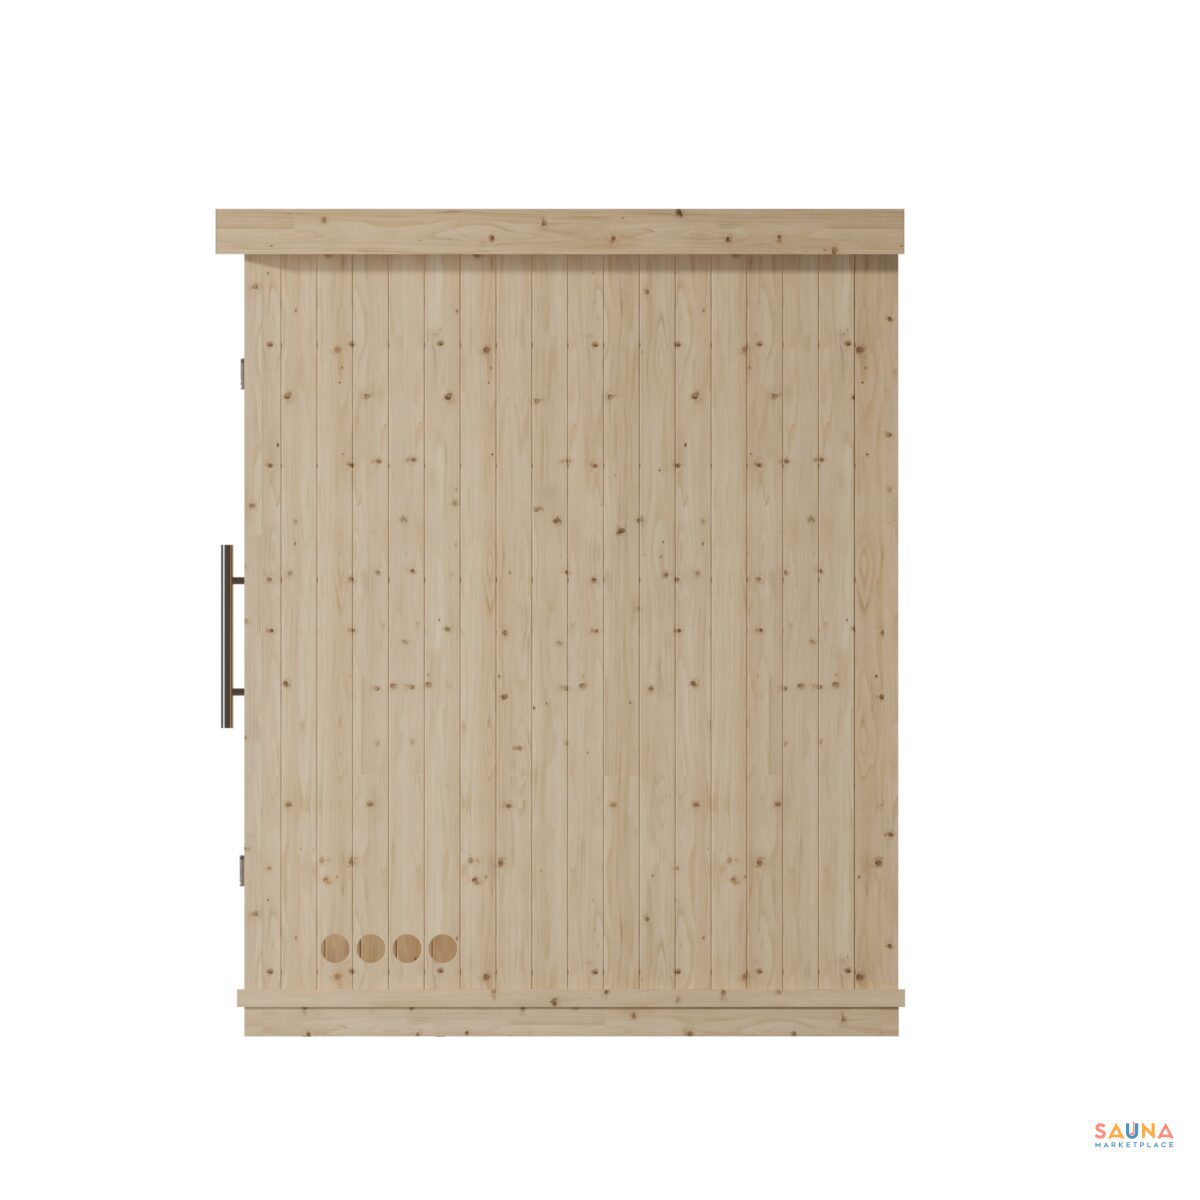 Saunalife X7 6 Person Indoor Sauna Kit Right Side With Intake Vents Shown